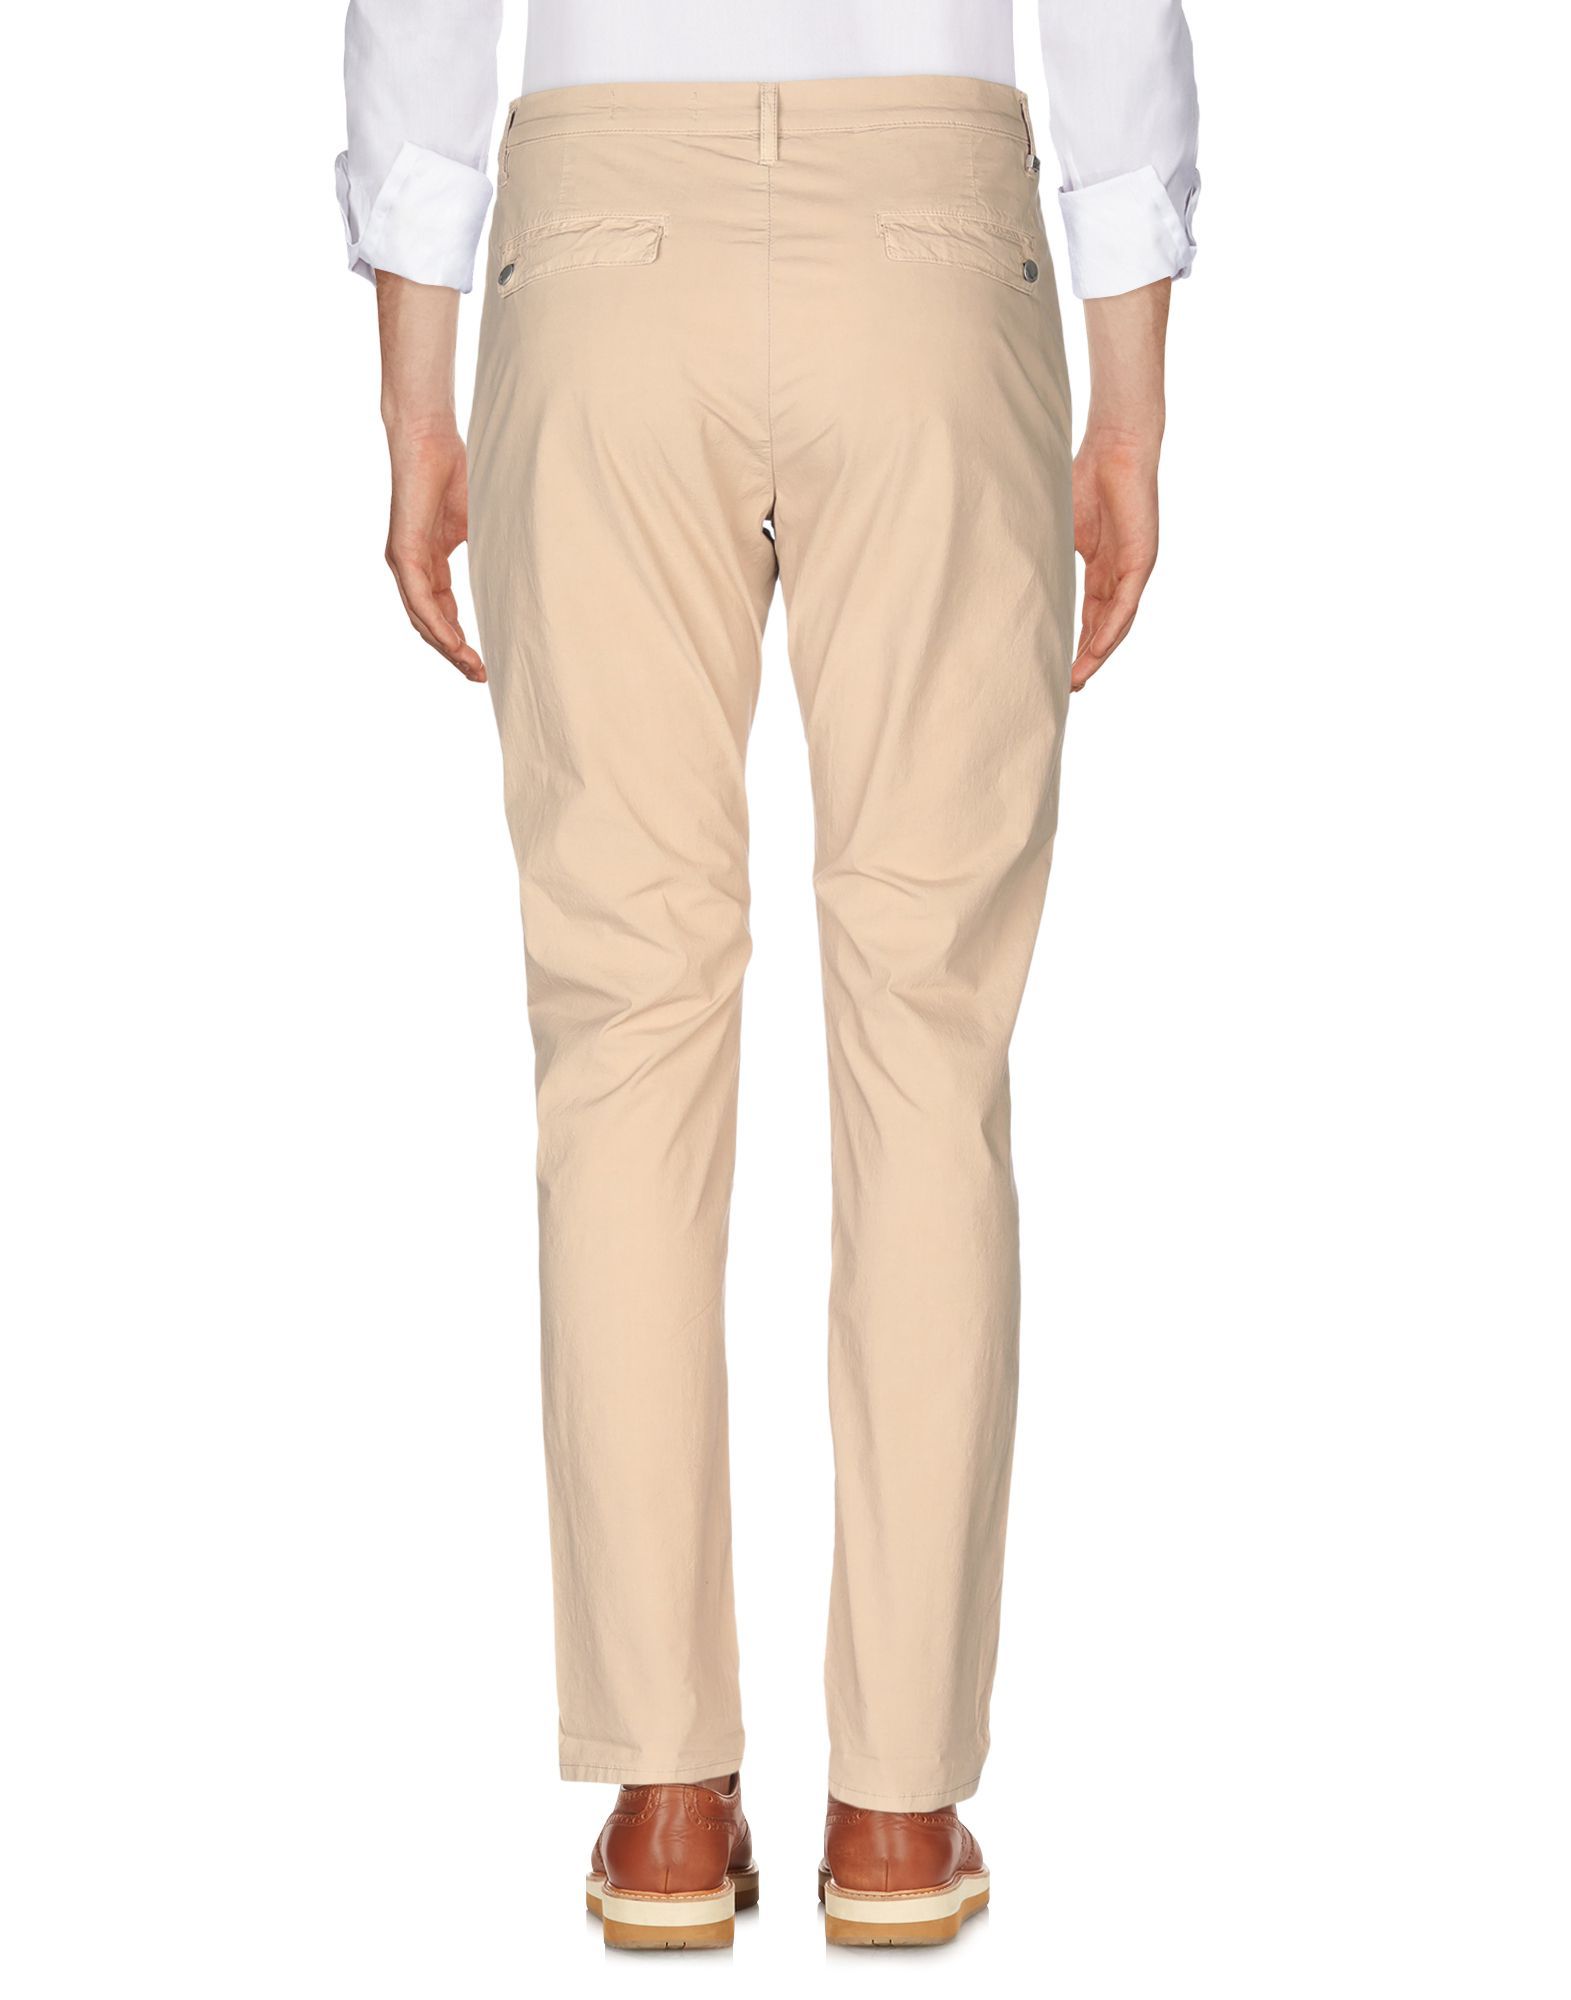 plain weave, logo, basic solid colour, mid rise, regular fit, tapered leg, button closing, multipockets, stretch, chinos, large sized